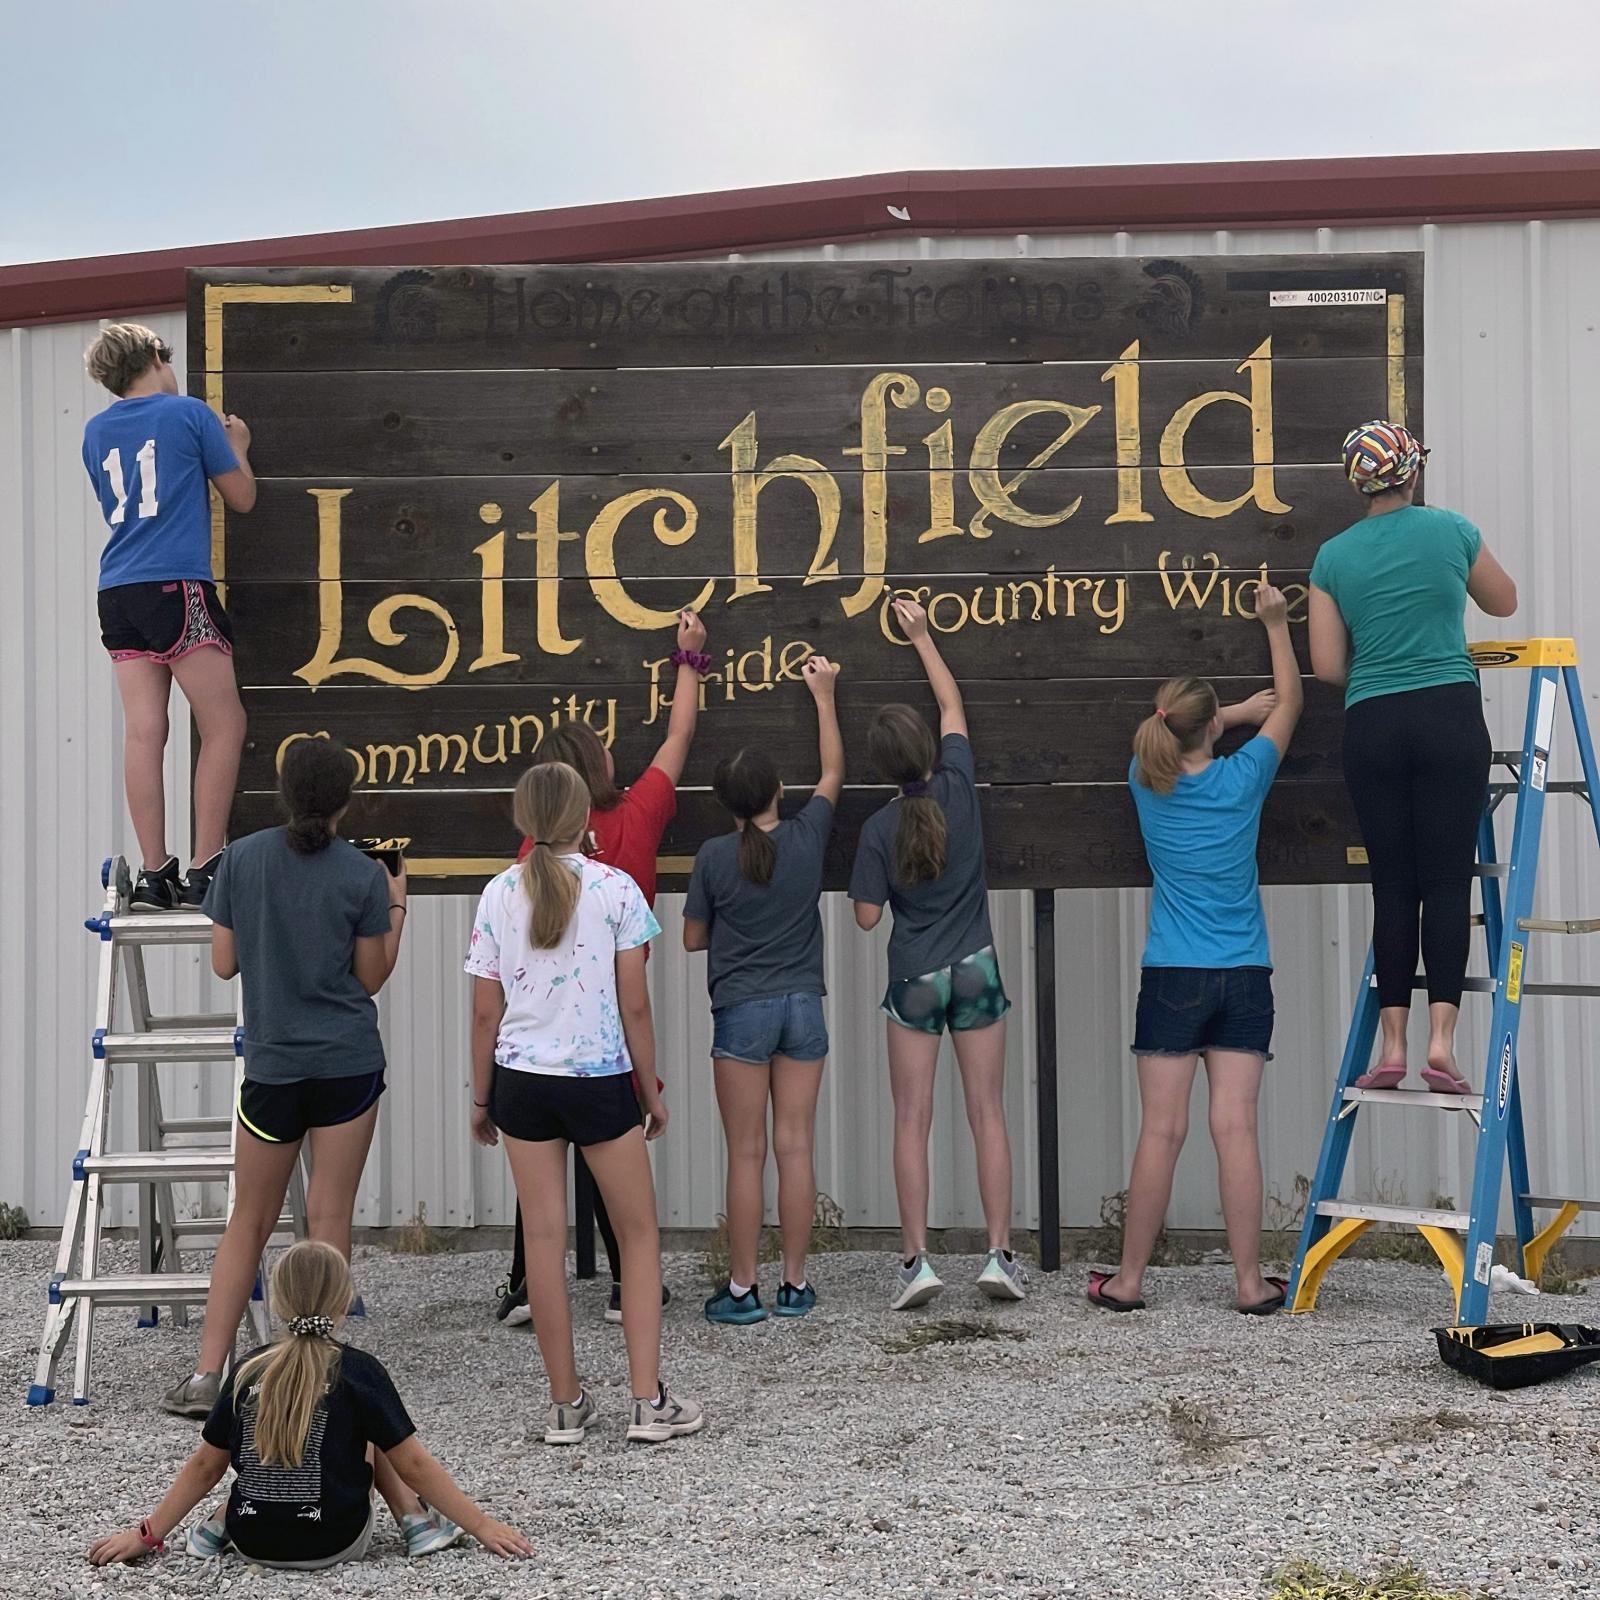 teenage 4-H club members work together to paint large "Litchfield" town sign